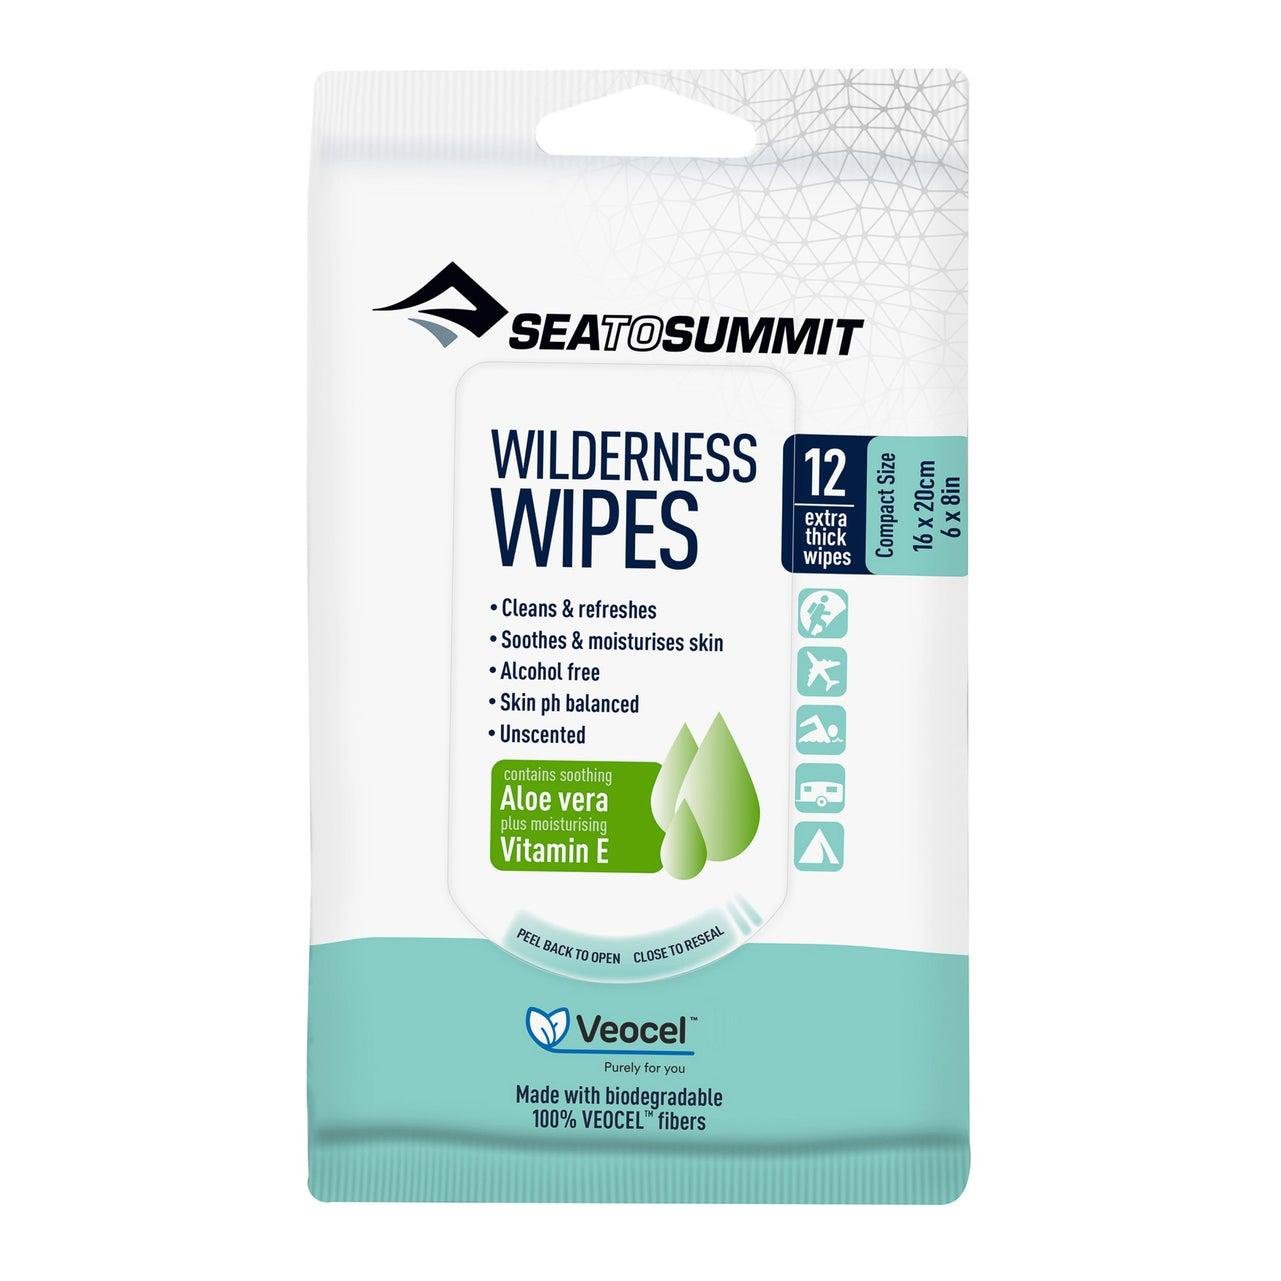 Wilderness Wipes compact